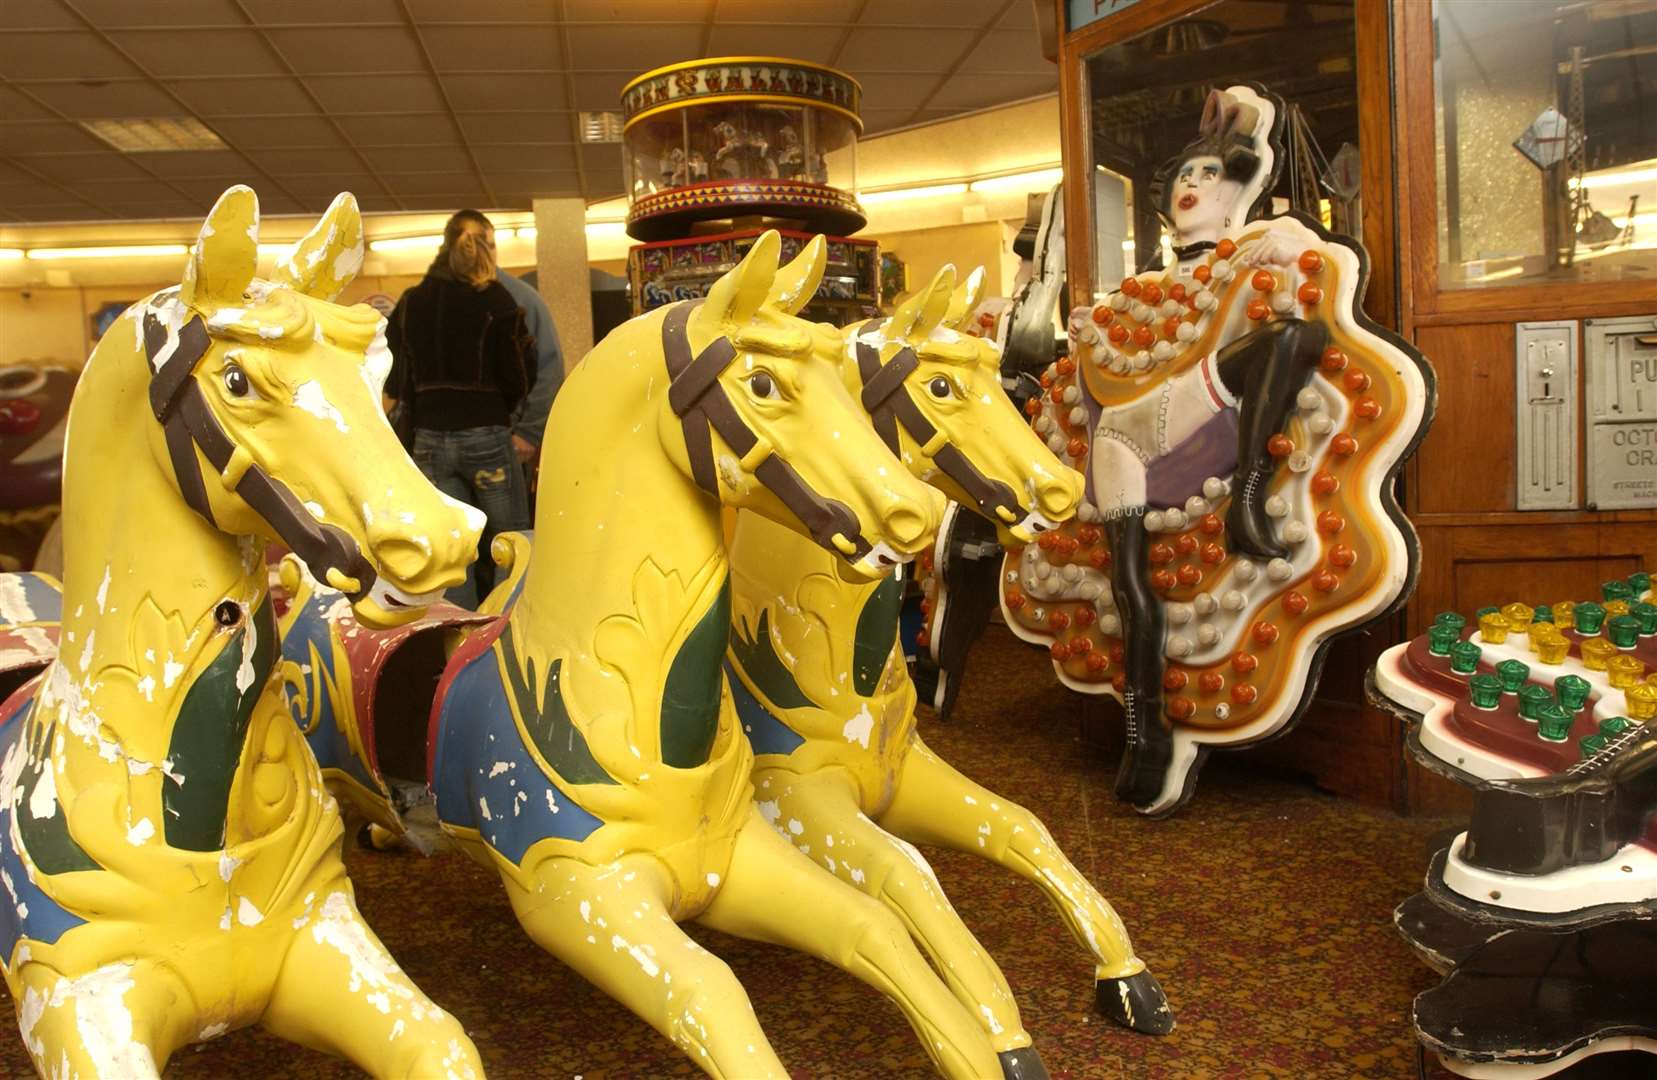 Folkestone Rotunda, 2007 - Auction to sell off the remnants of the funfair and arcade, including these horses